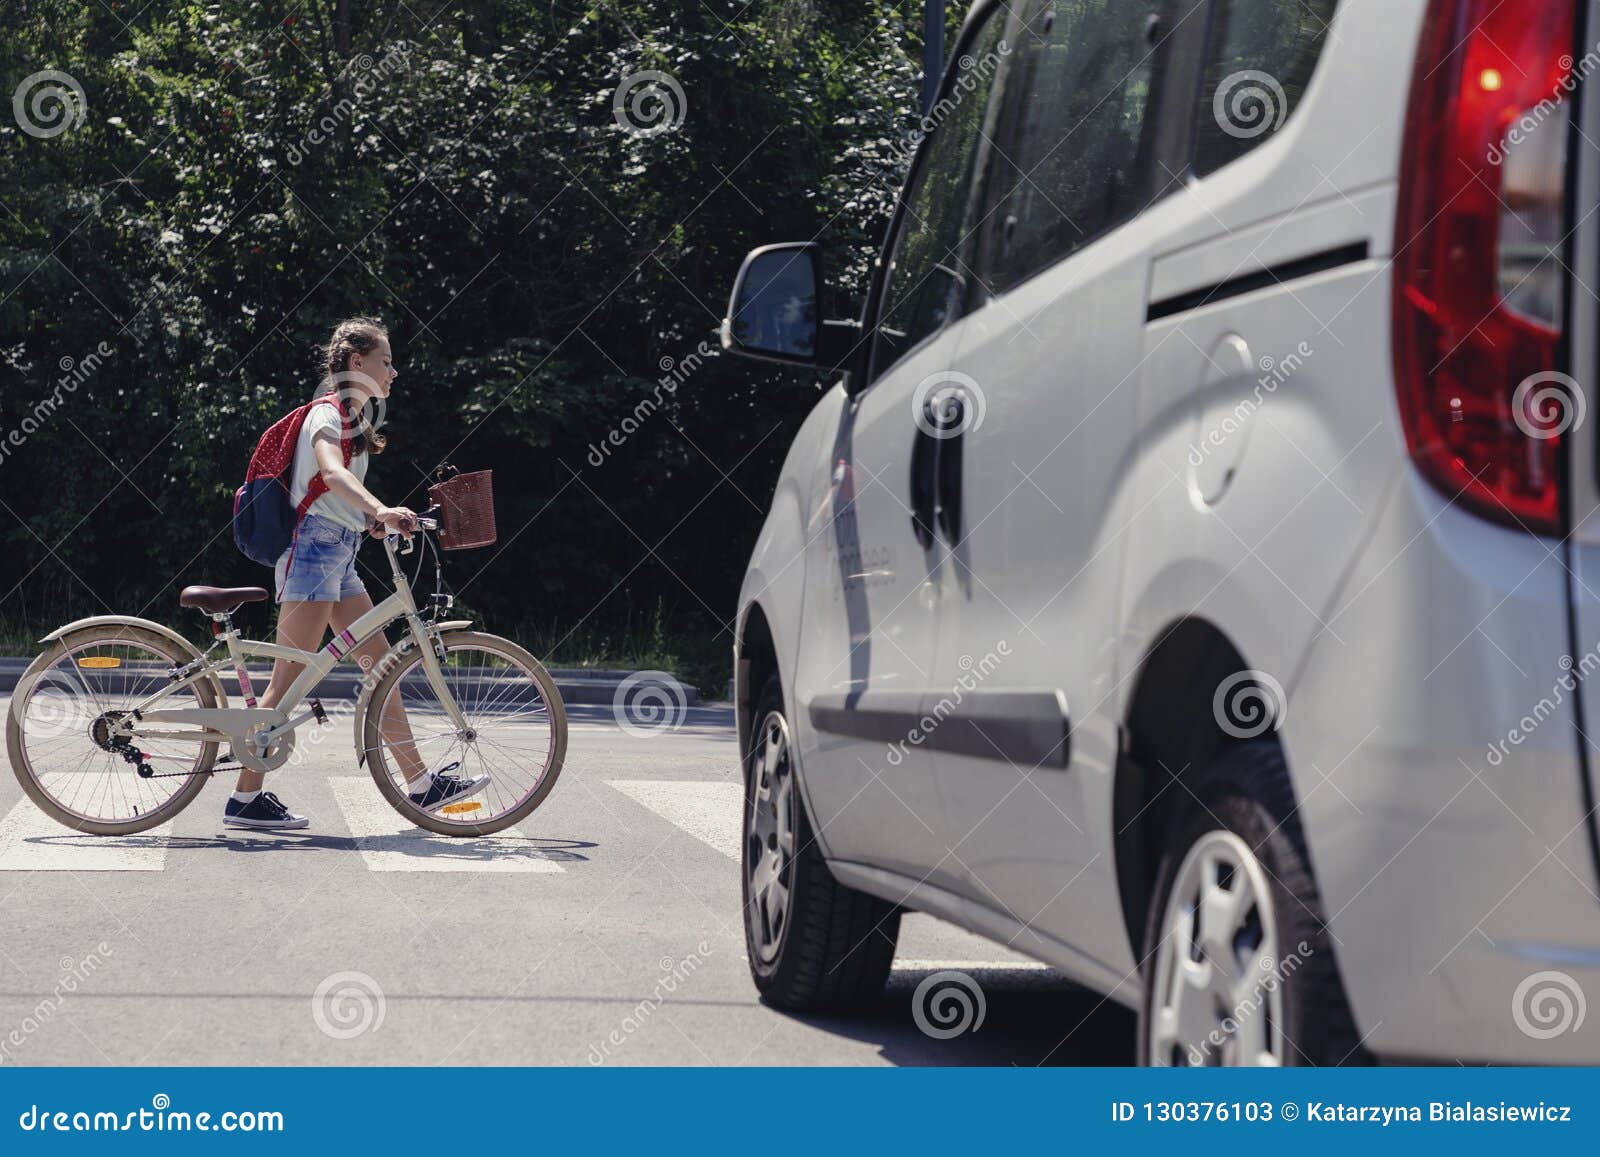 girl with backpack and bike on pedestrian crossing